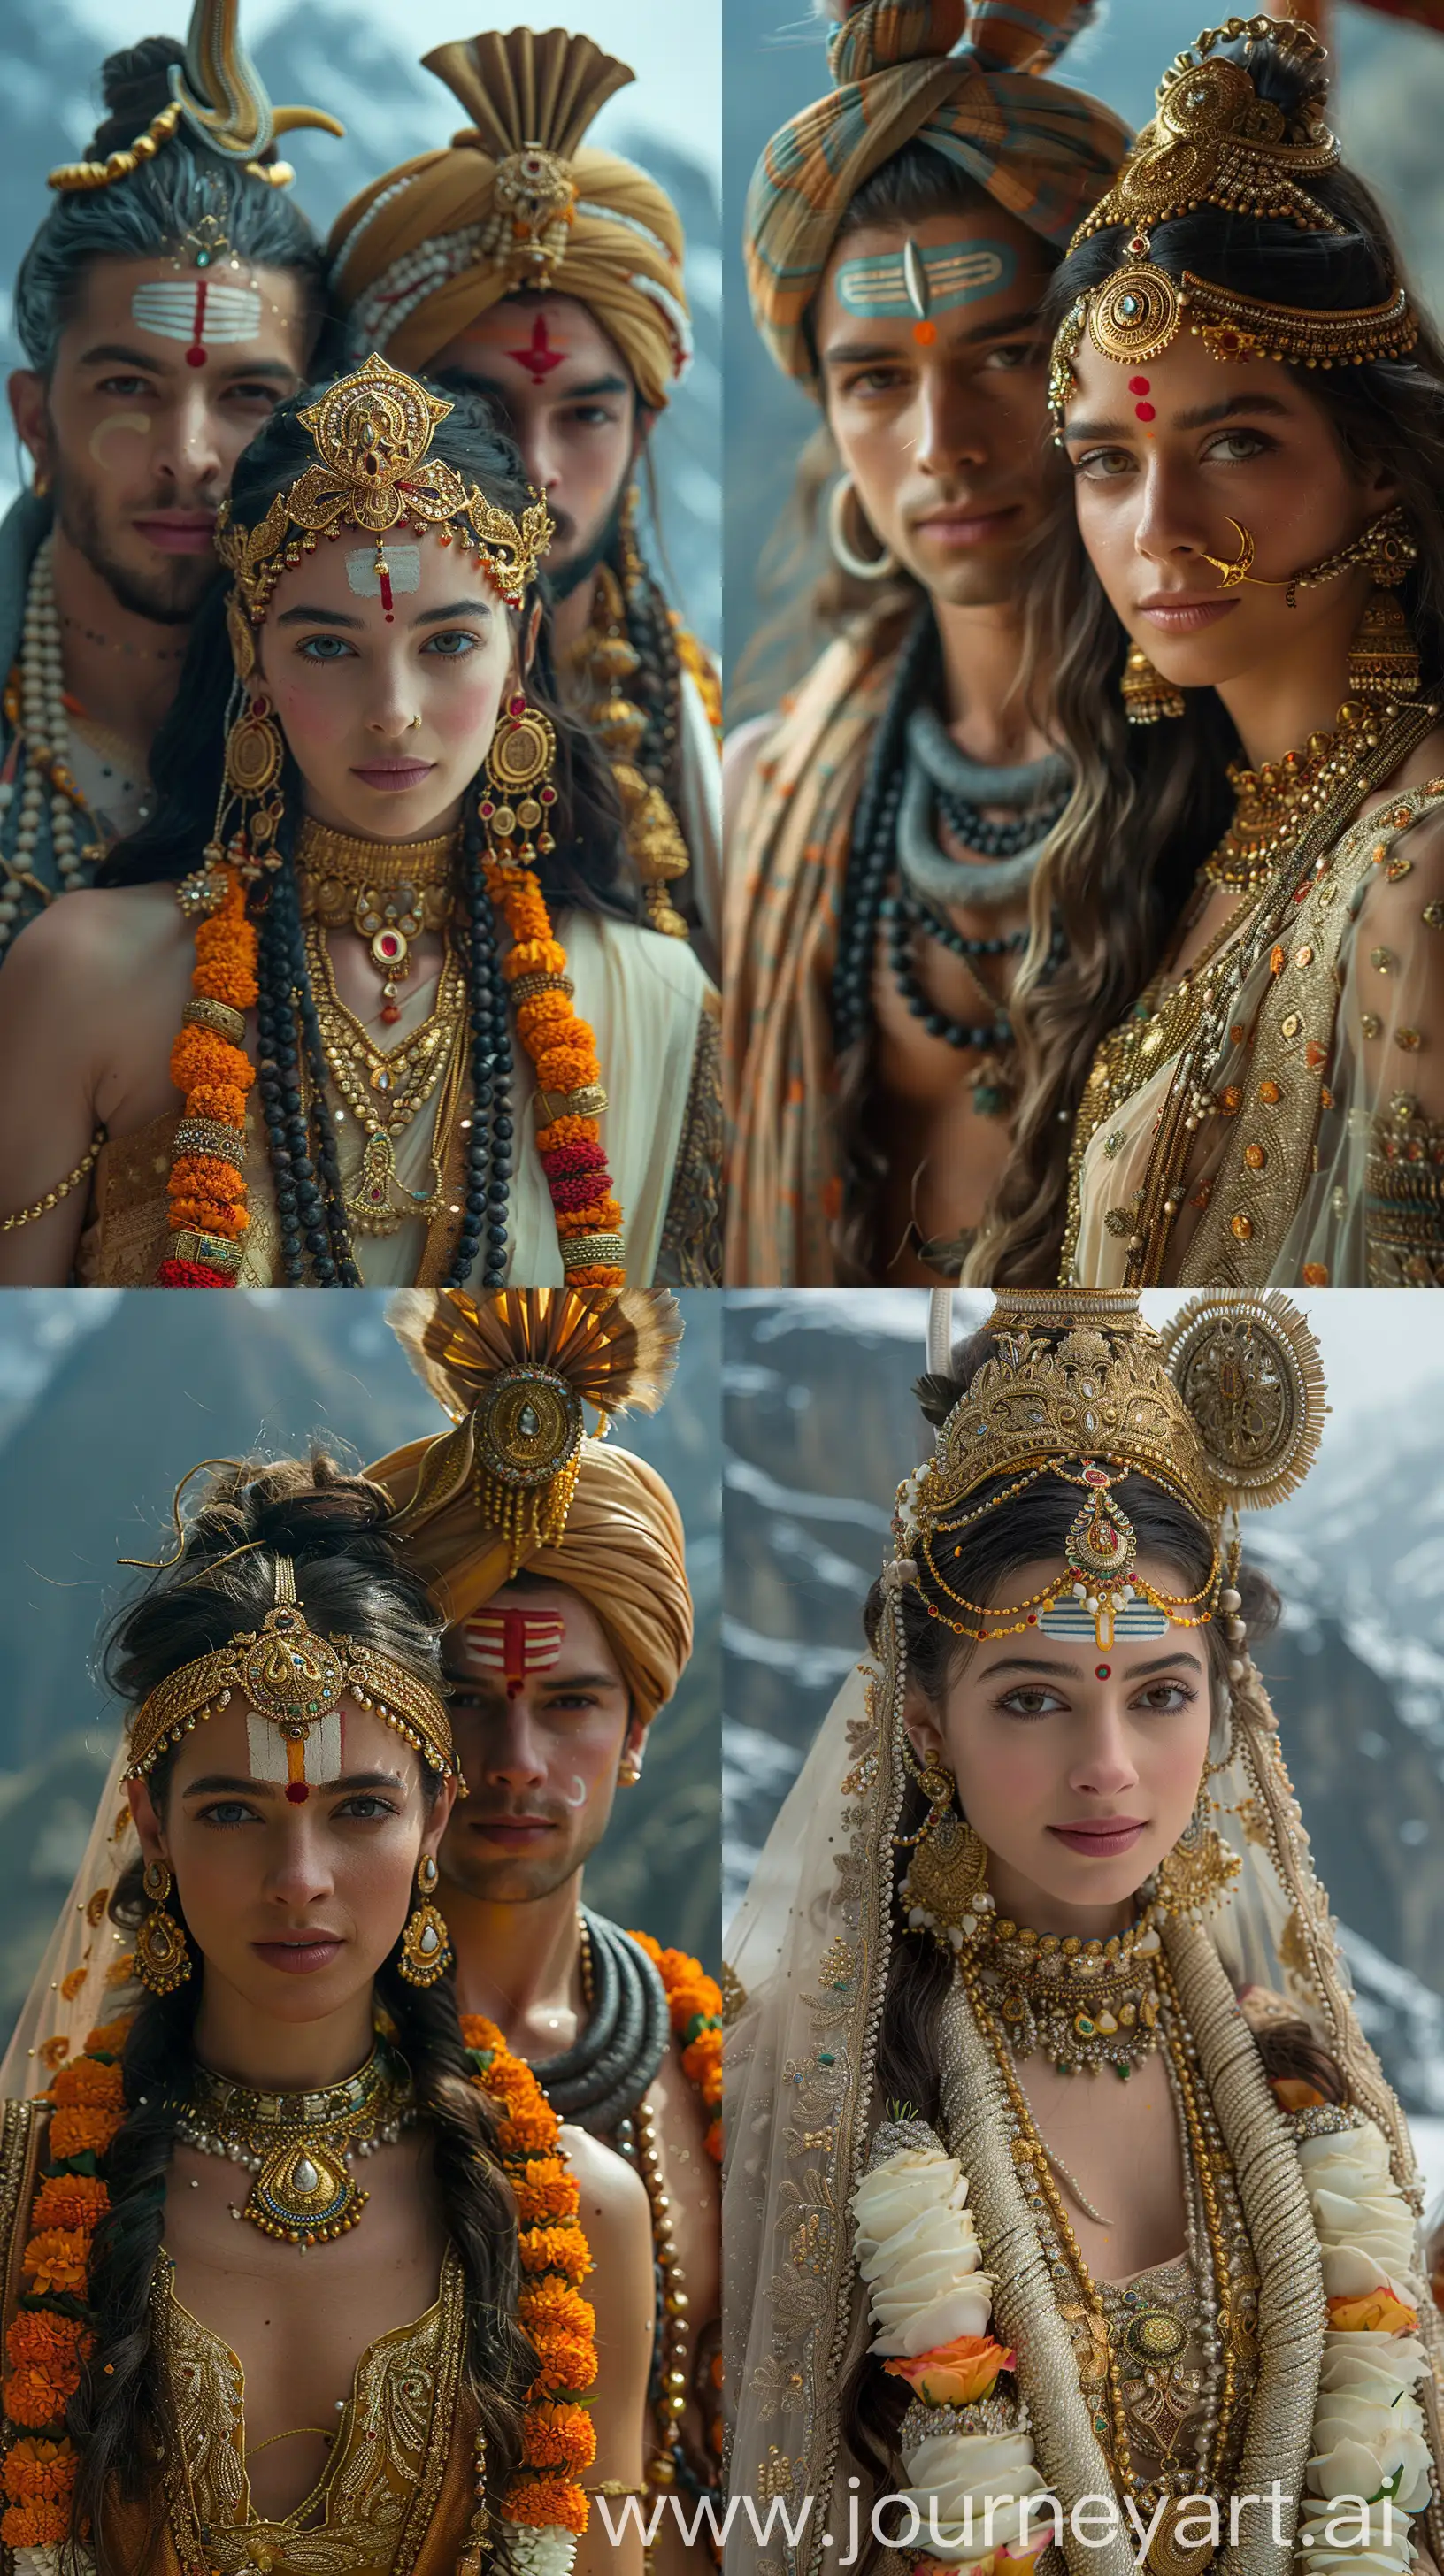 Celestial-Shivratri-Divine-Union-of-Lord-Shiva-and-Parvati-in-the-Himalayas